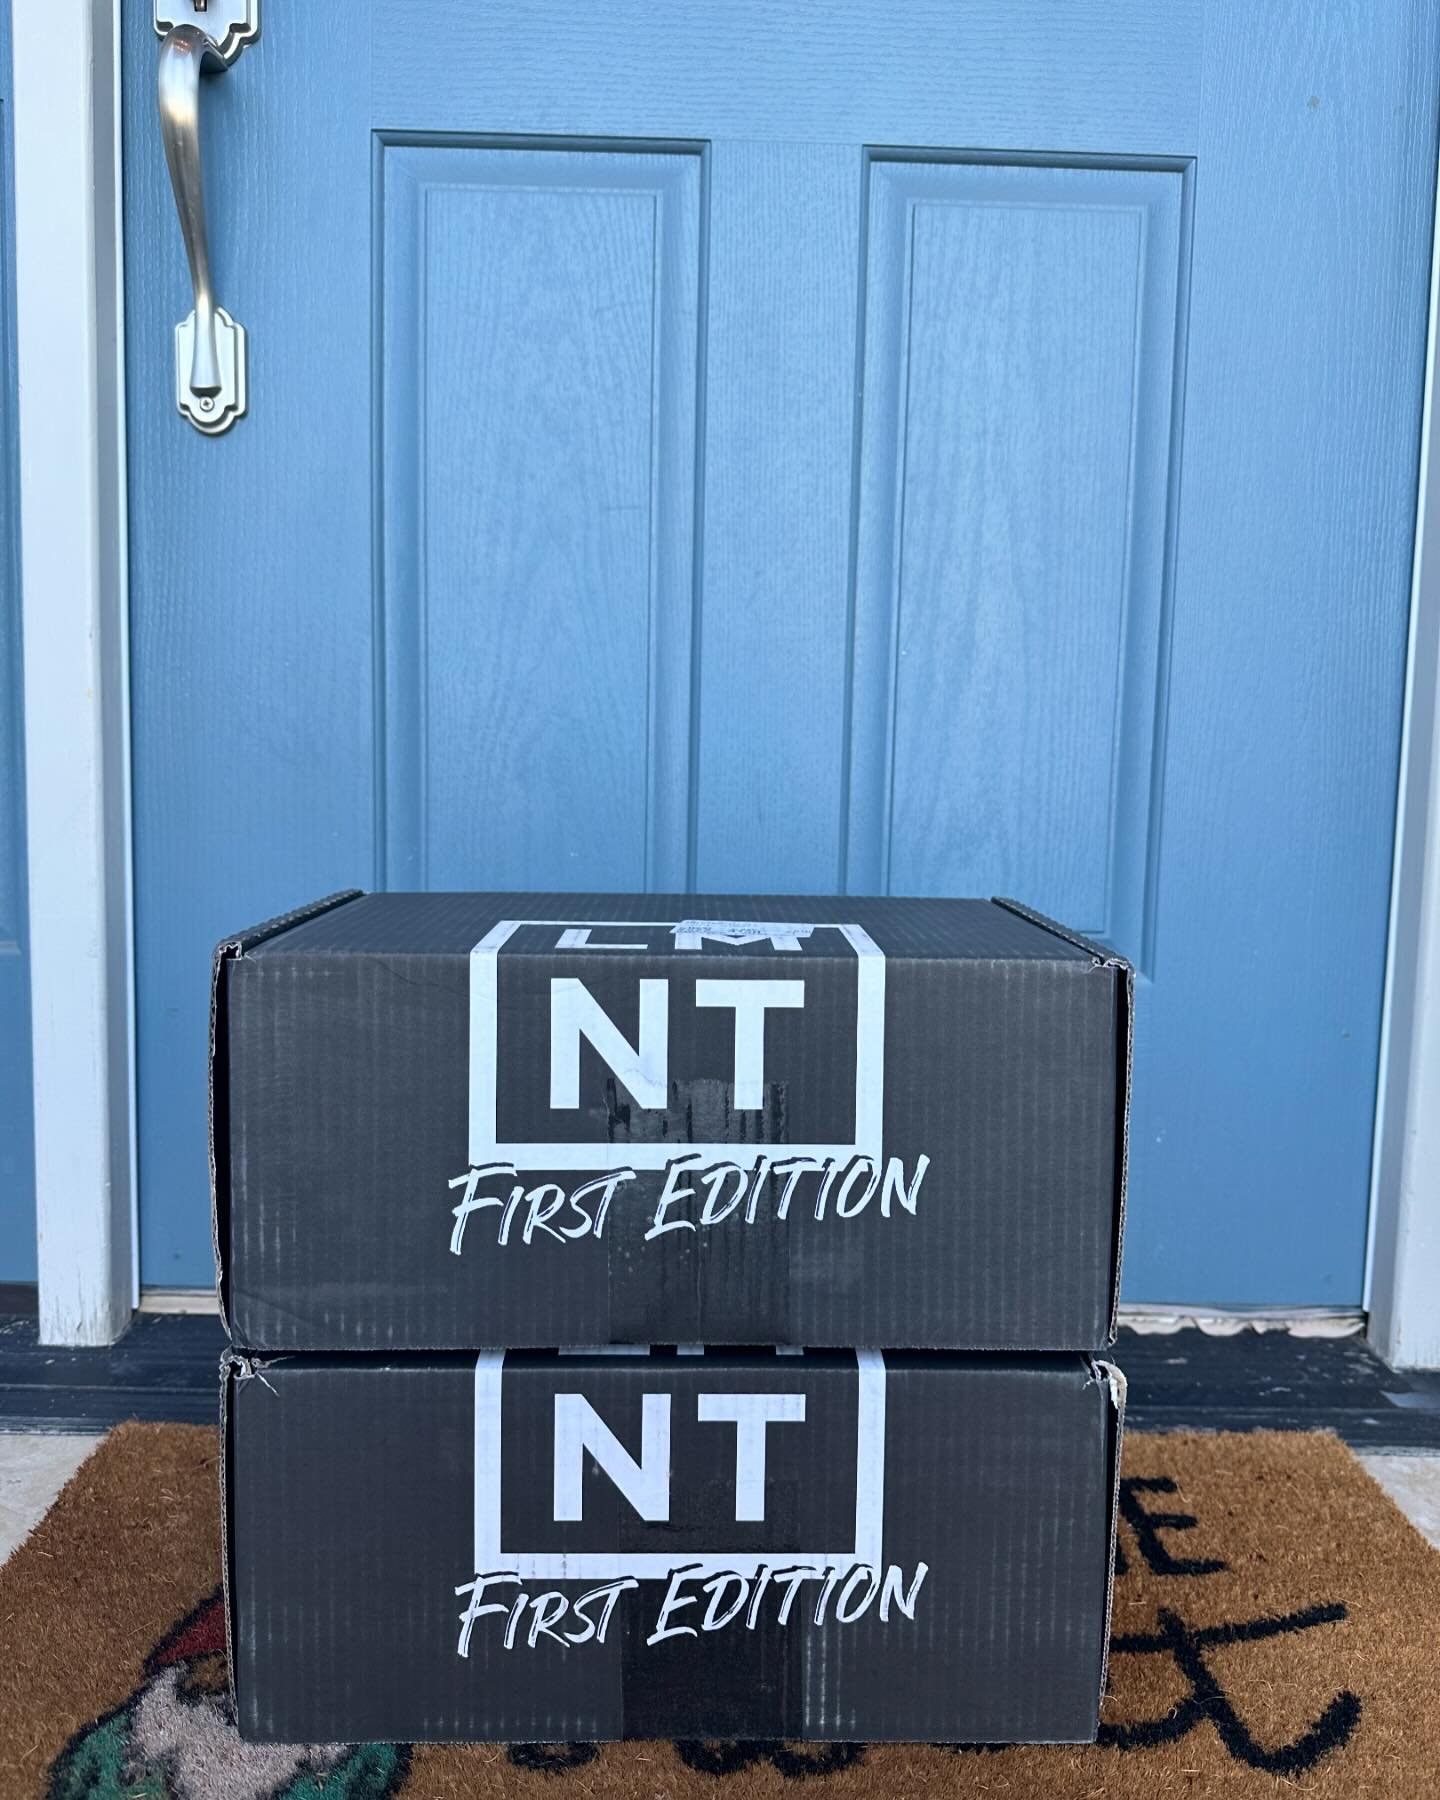 We had the BEST SURPRISE DELIVERY today. We cannot wait to share these with all of you! 🤤 Coming soon! #StaySalty @drinklmnt